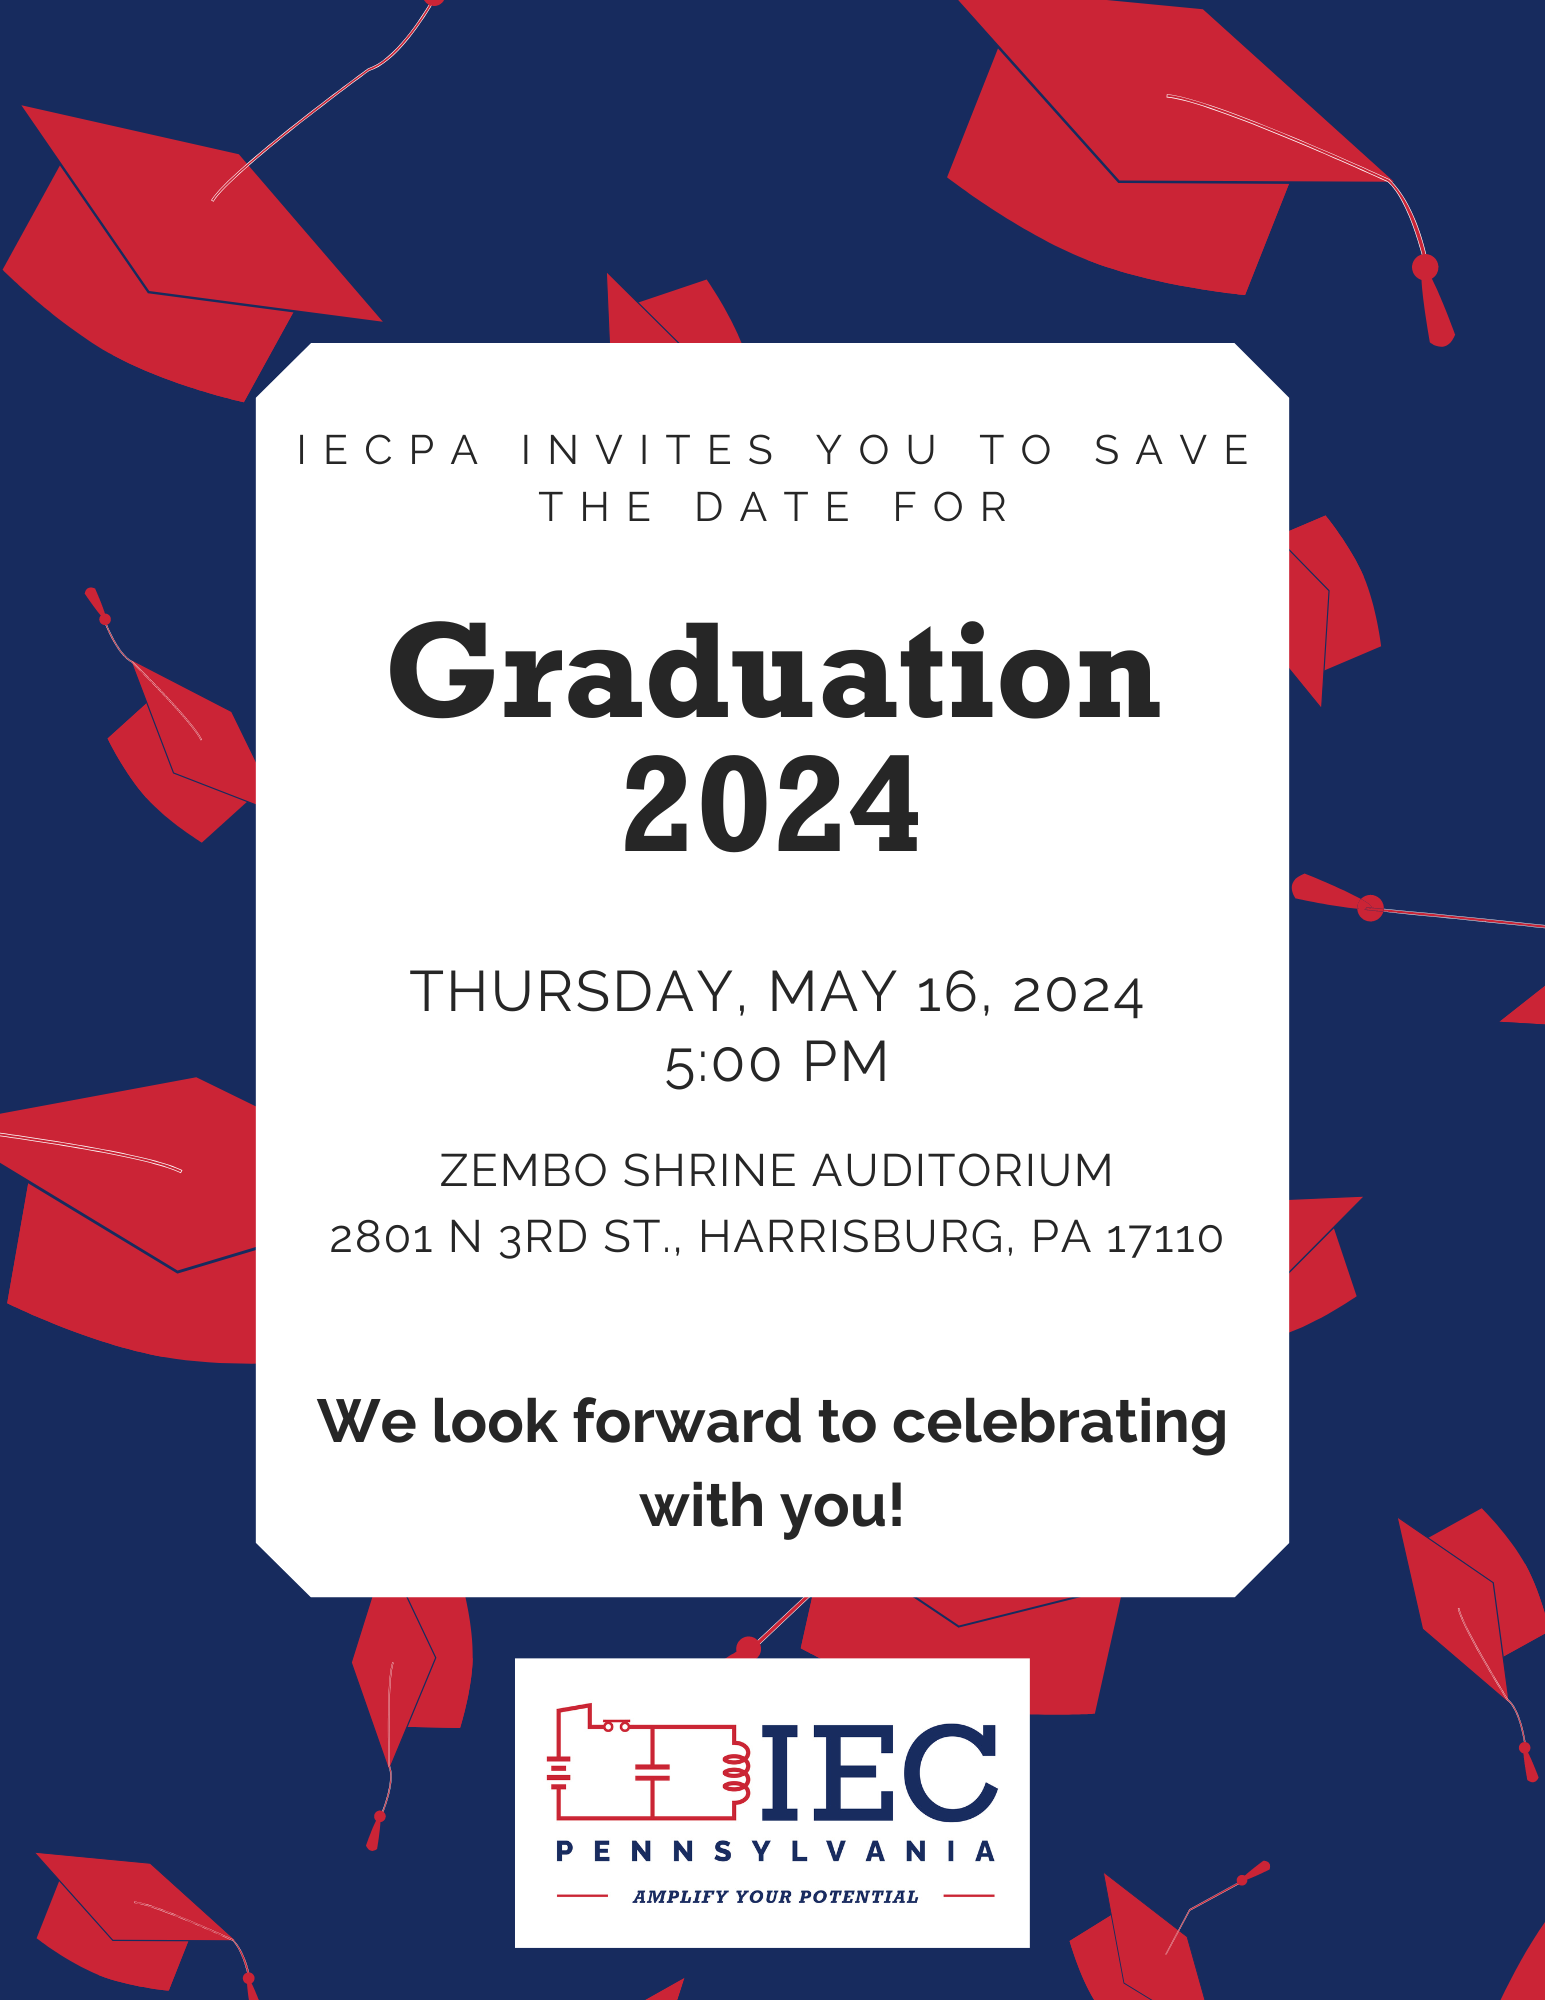 2024 save the date for apprenticeship graduation